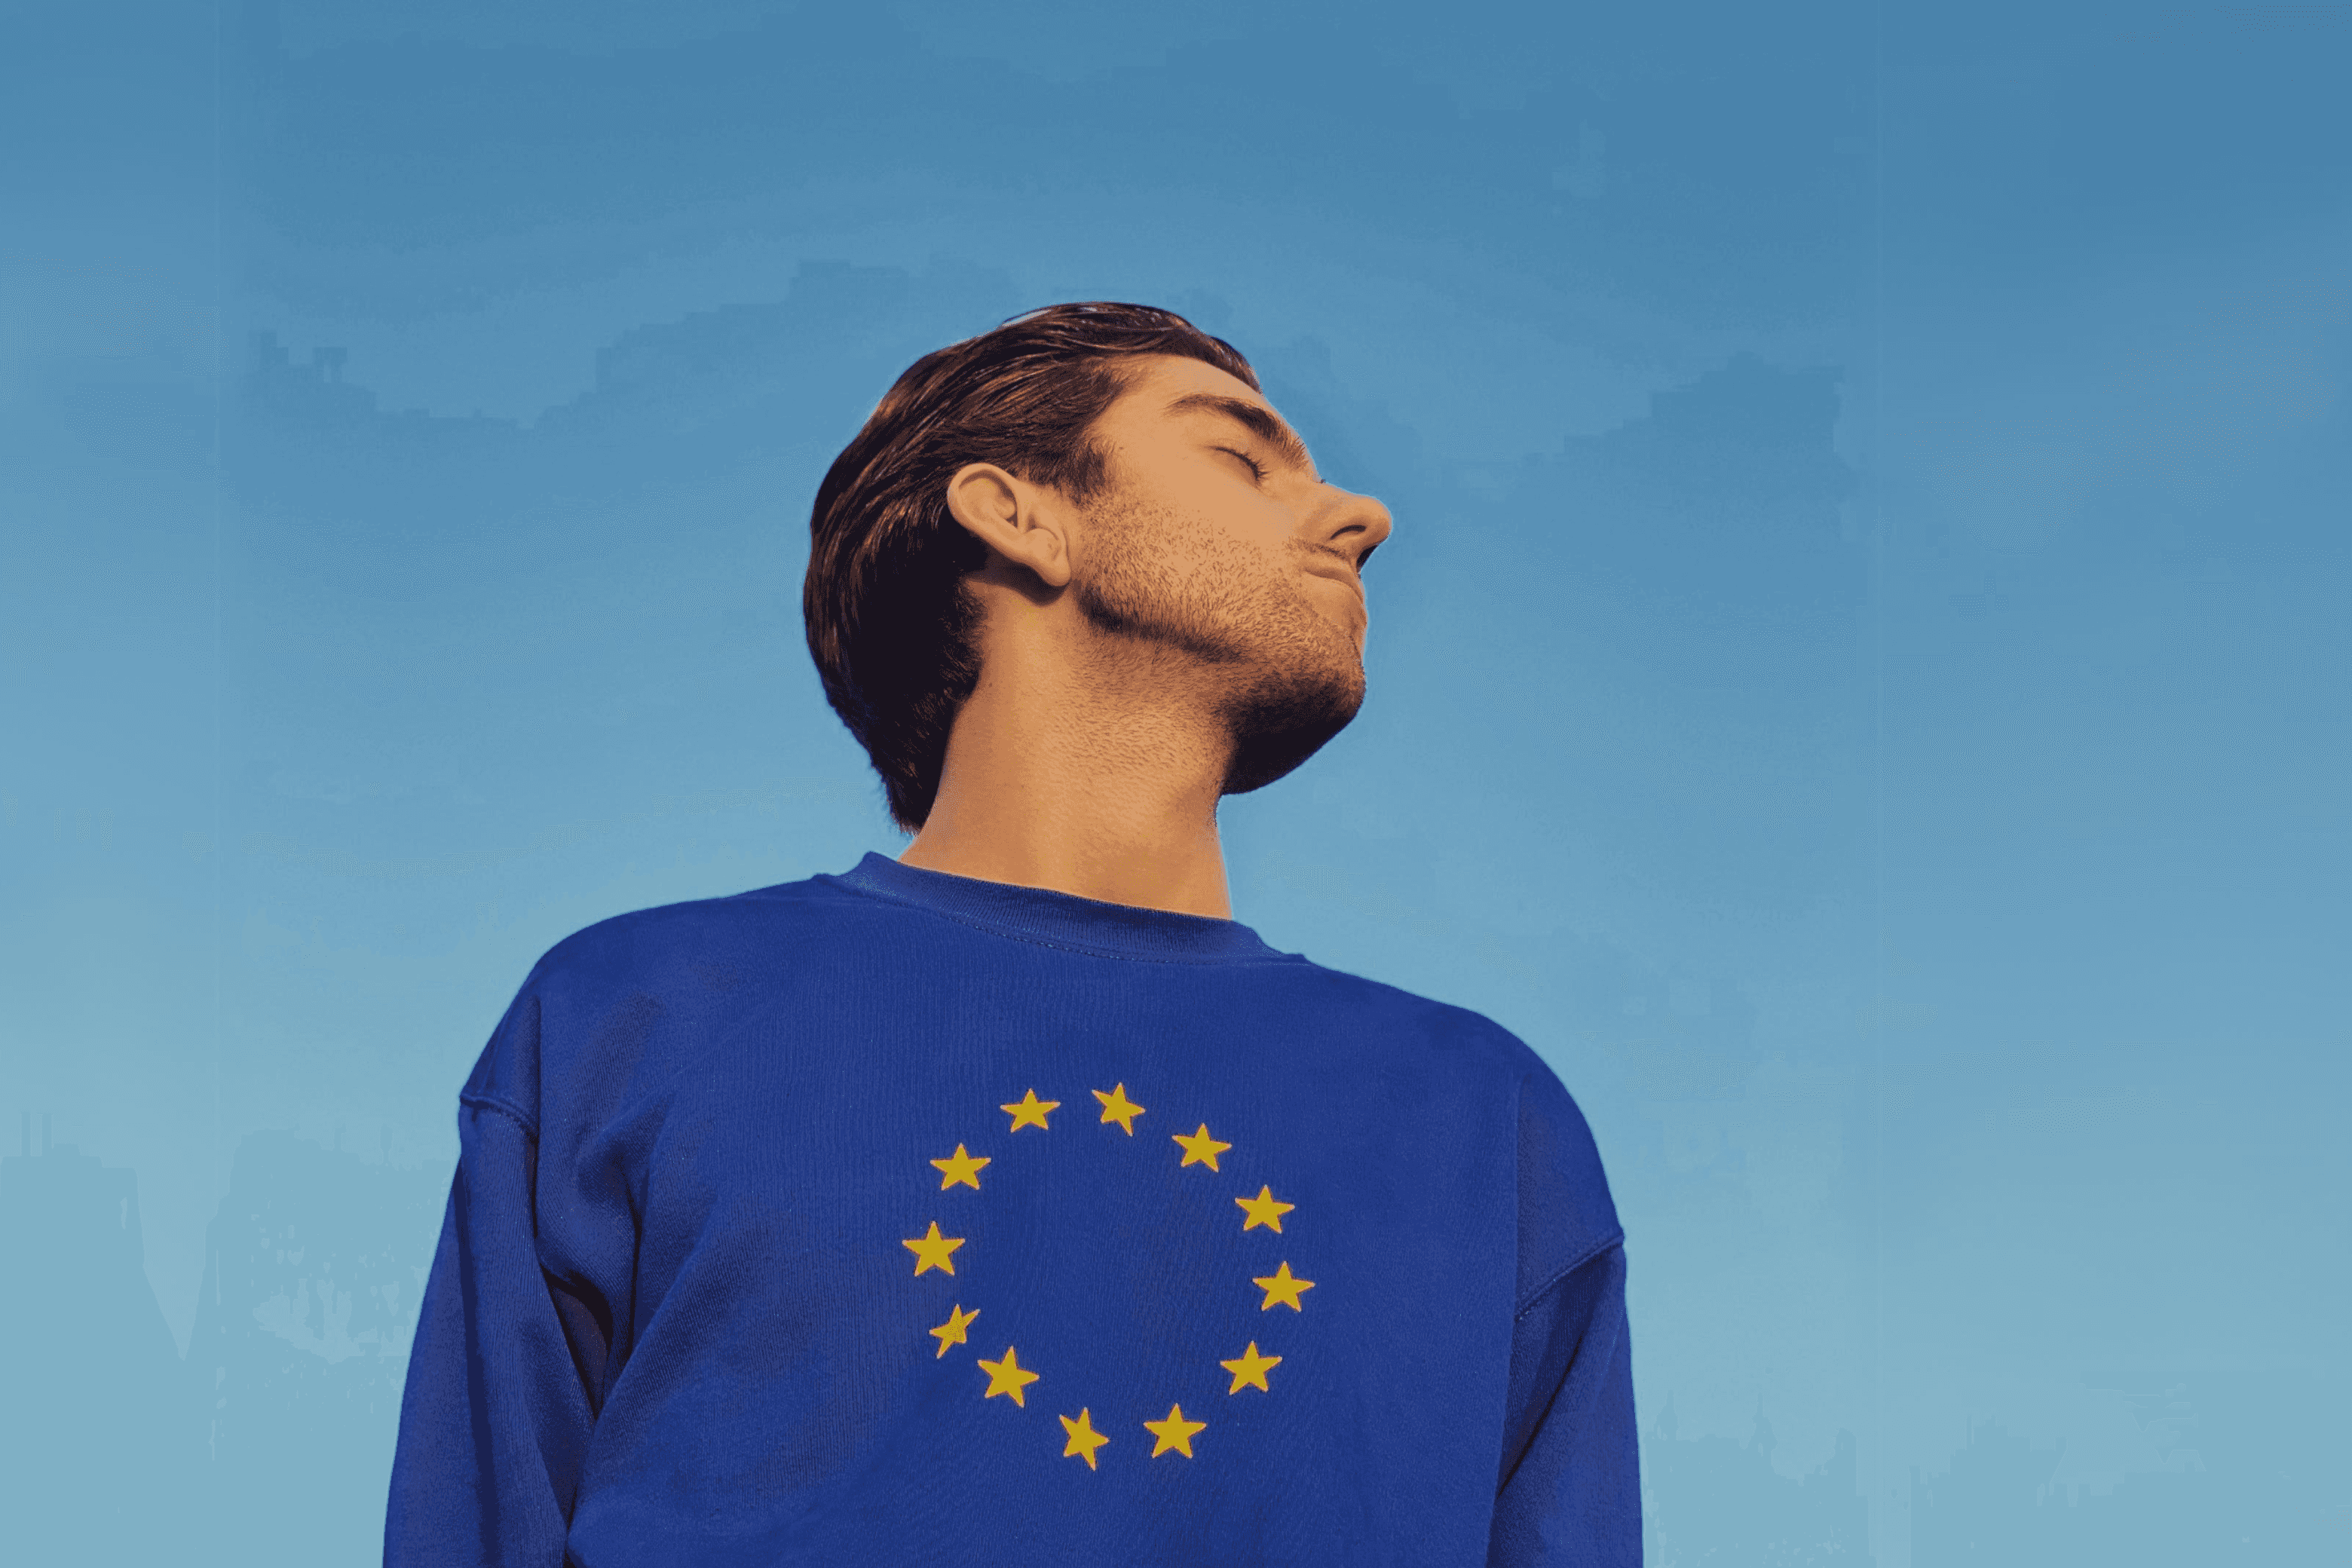 Person wearing EU pullover with their head turned to the sky